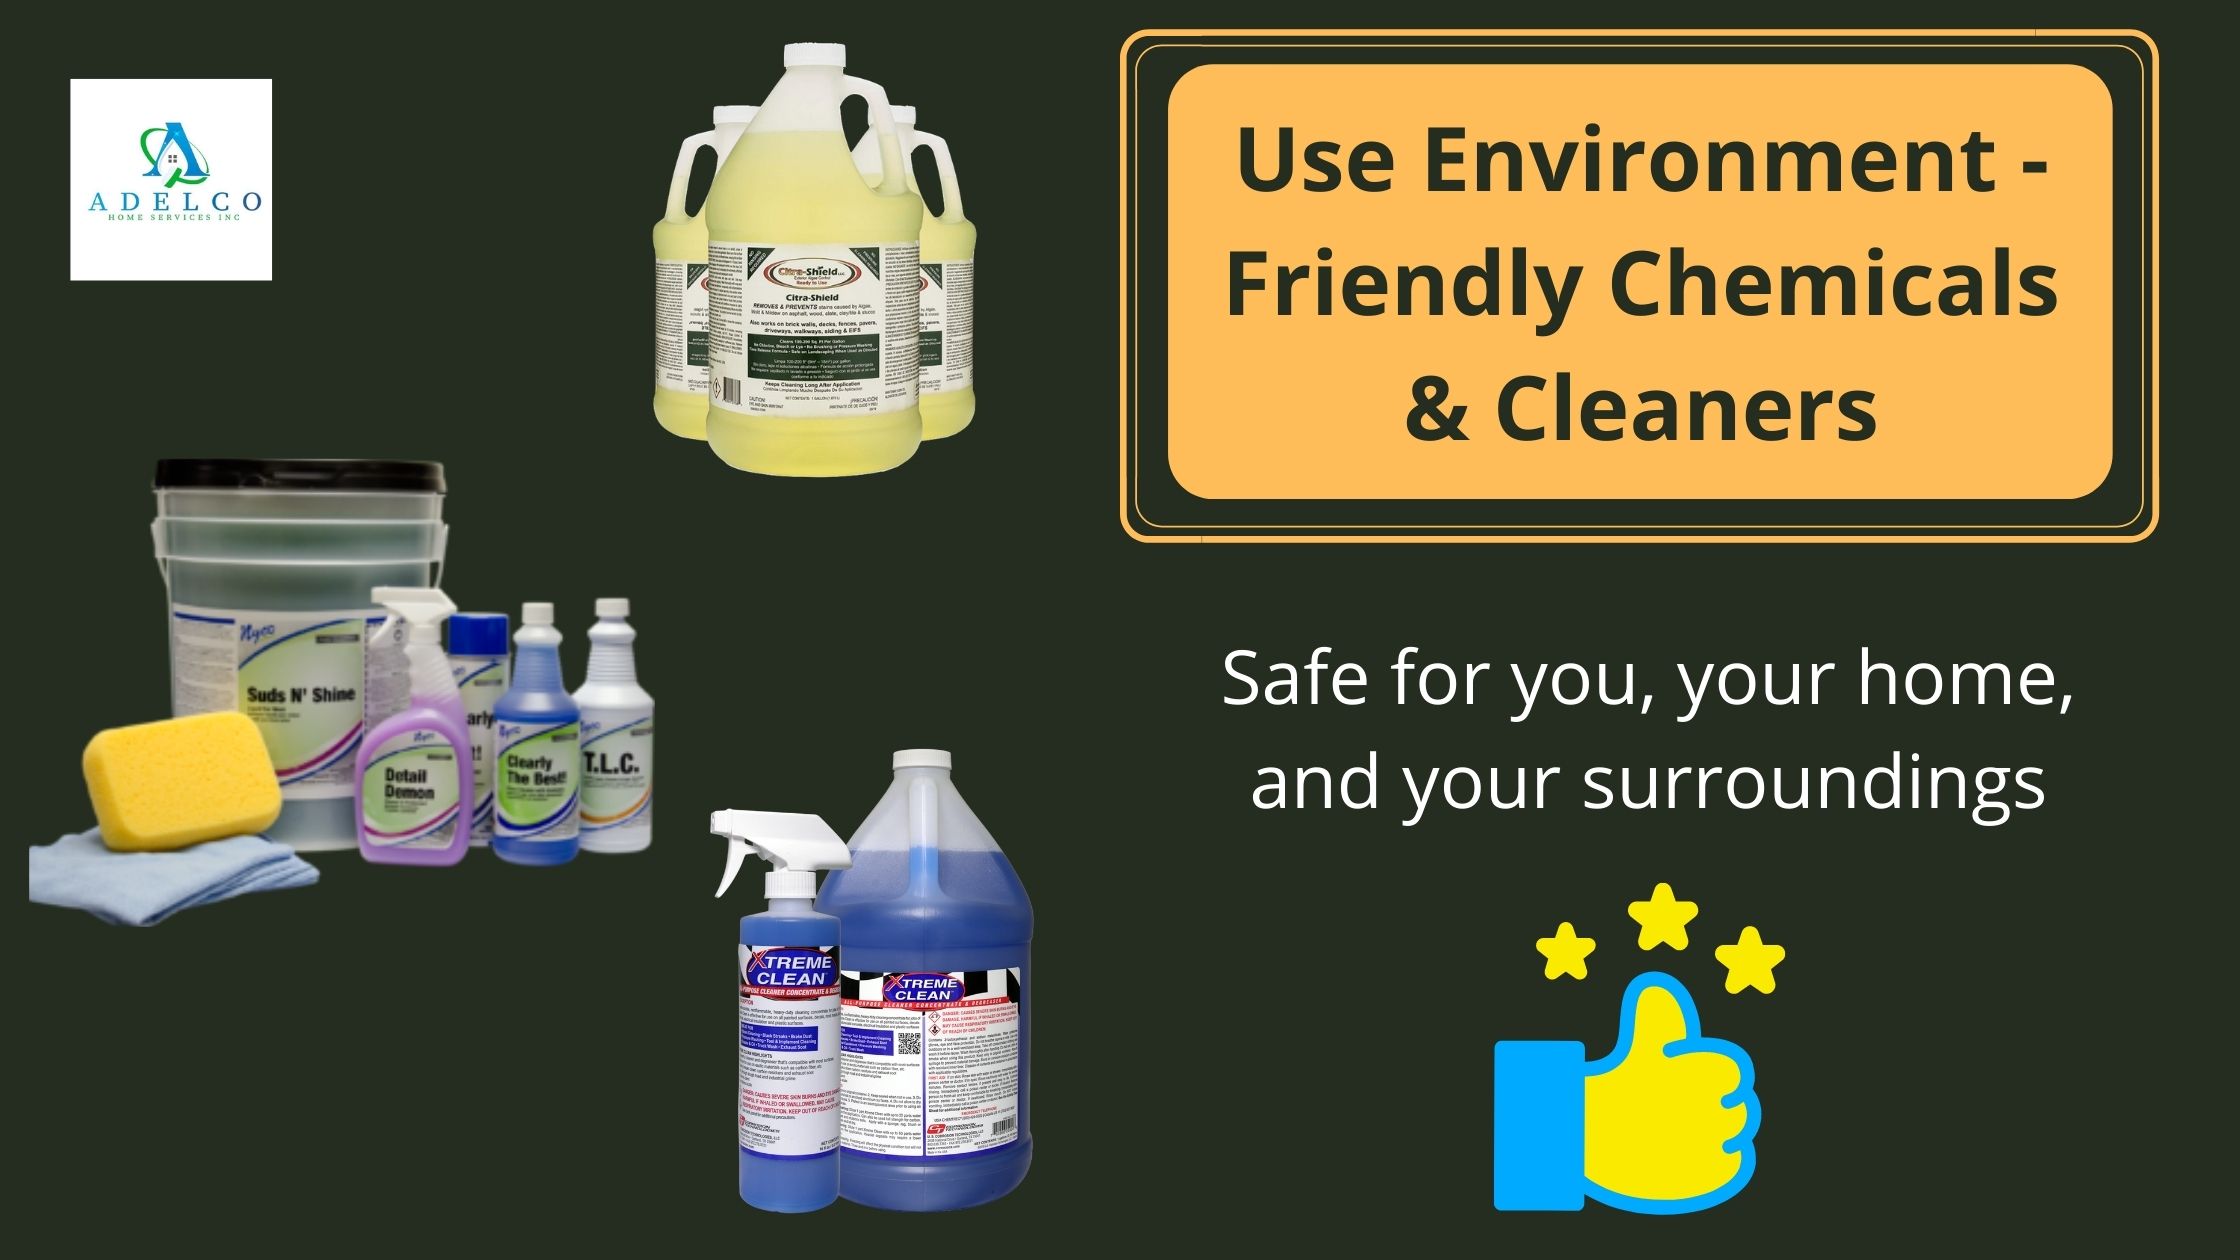 Use Environment - Friendly Chemicals & Cleaners